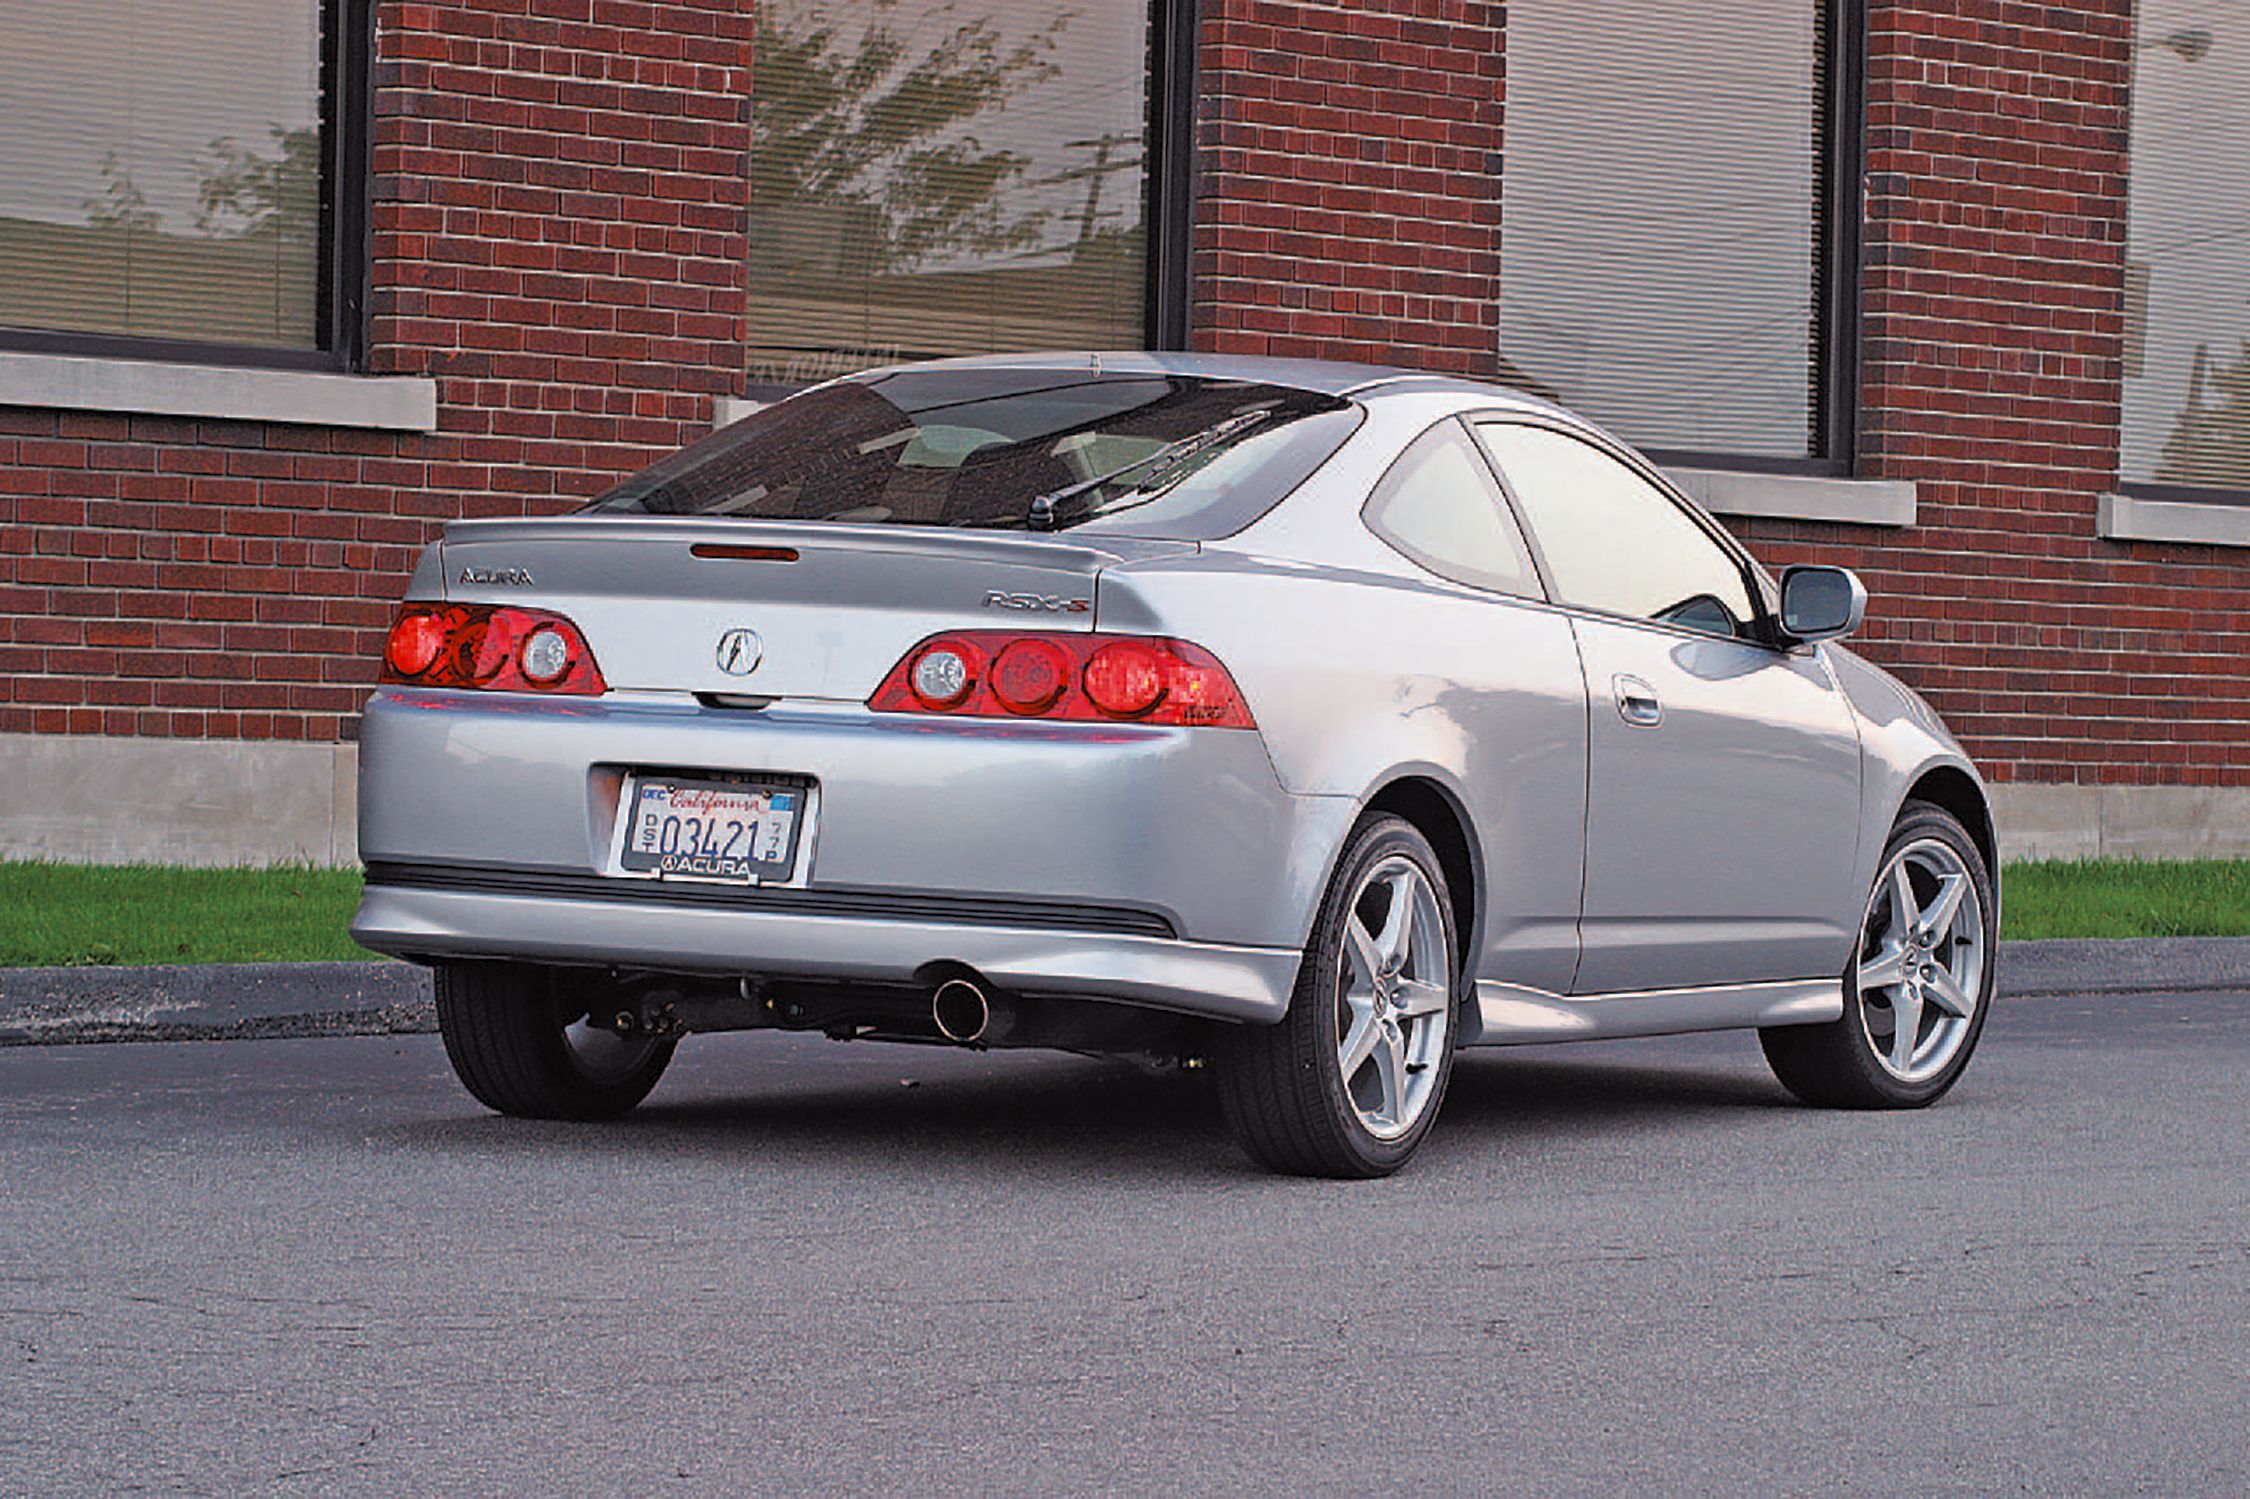 Tested: 2005 Acura RSX Type-S